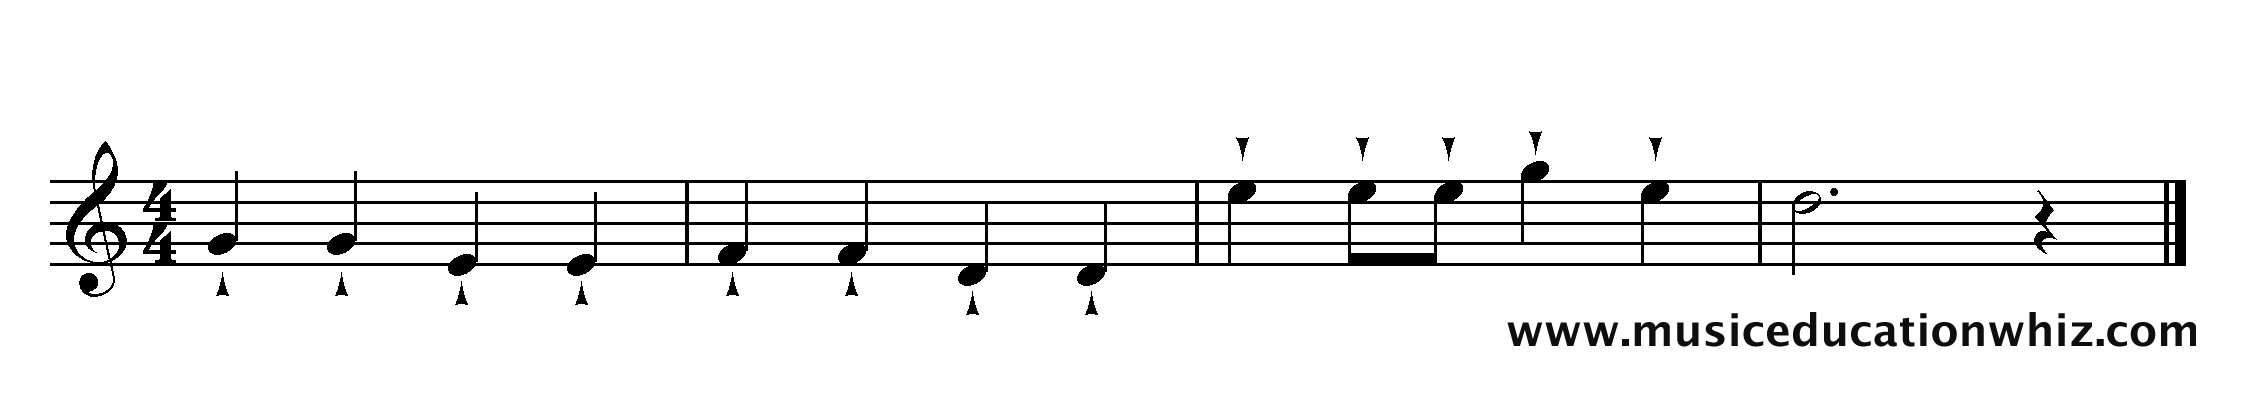 The music for 'Mary Mary Quite Contrary' with staccatissimo markings.